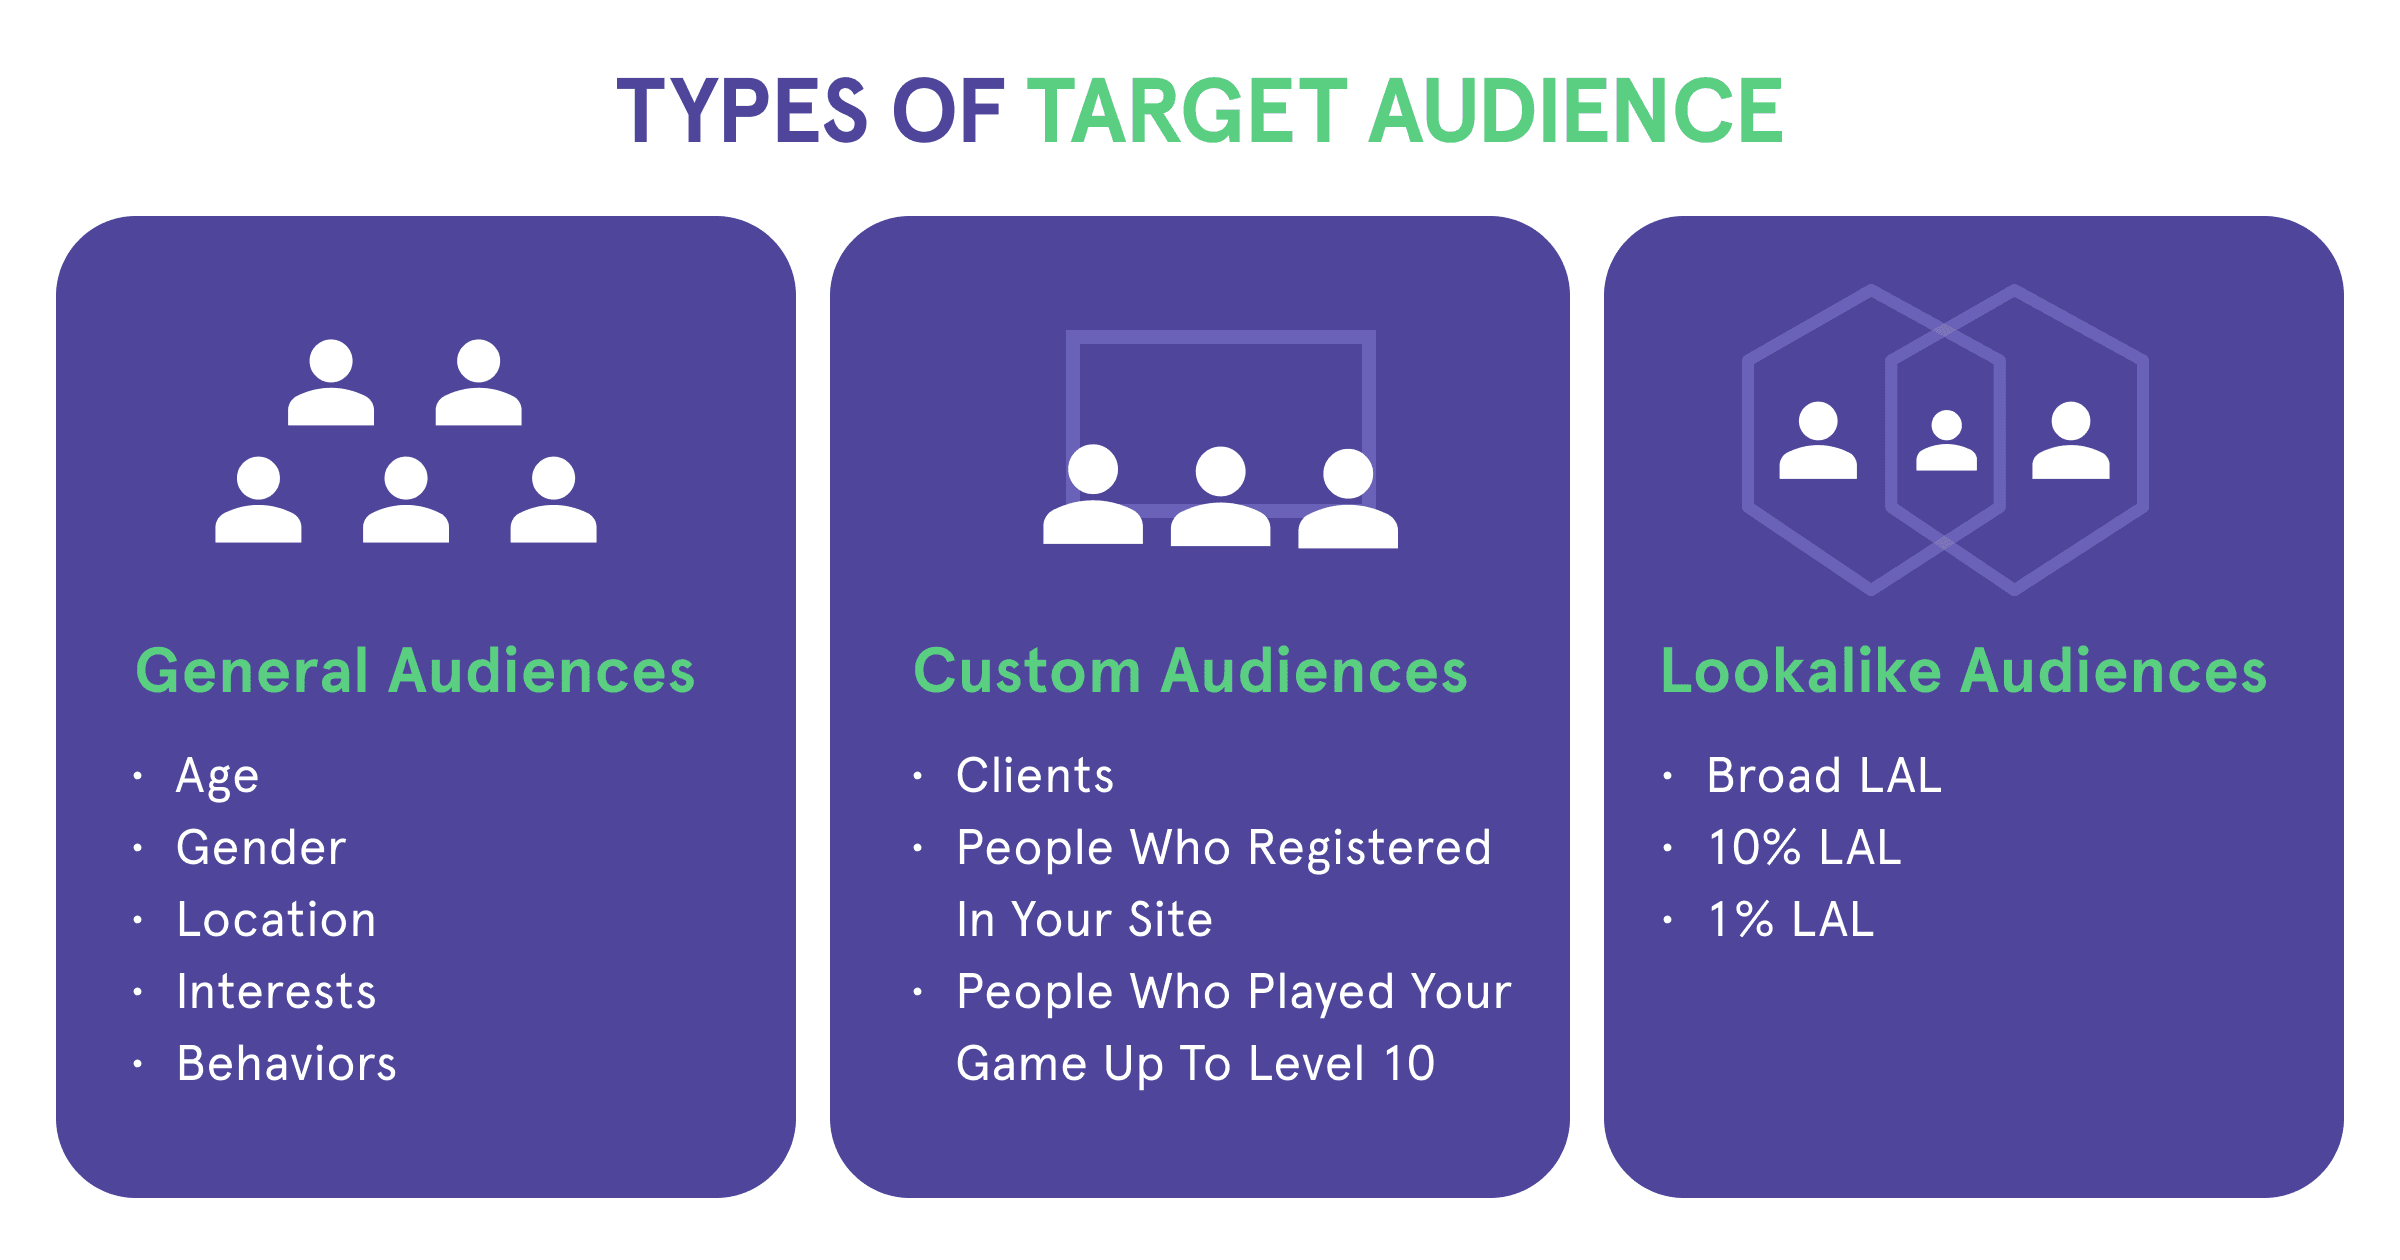 Types of Target Audience